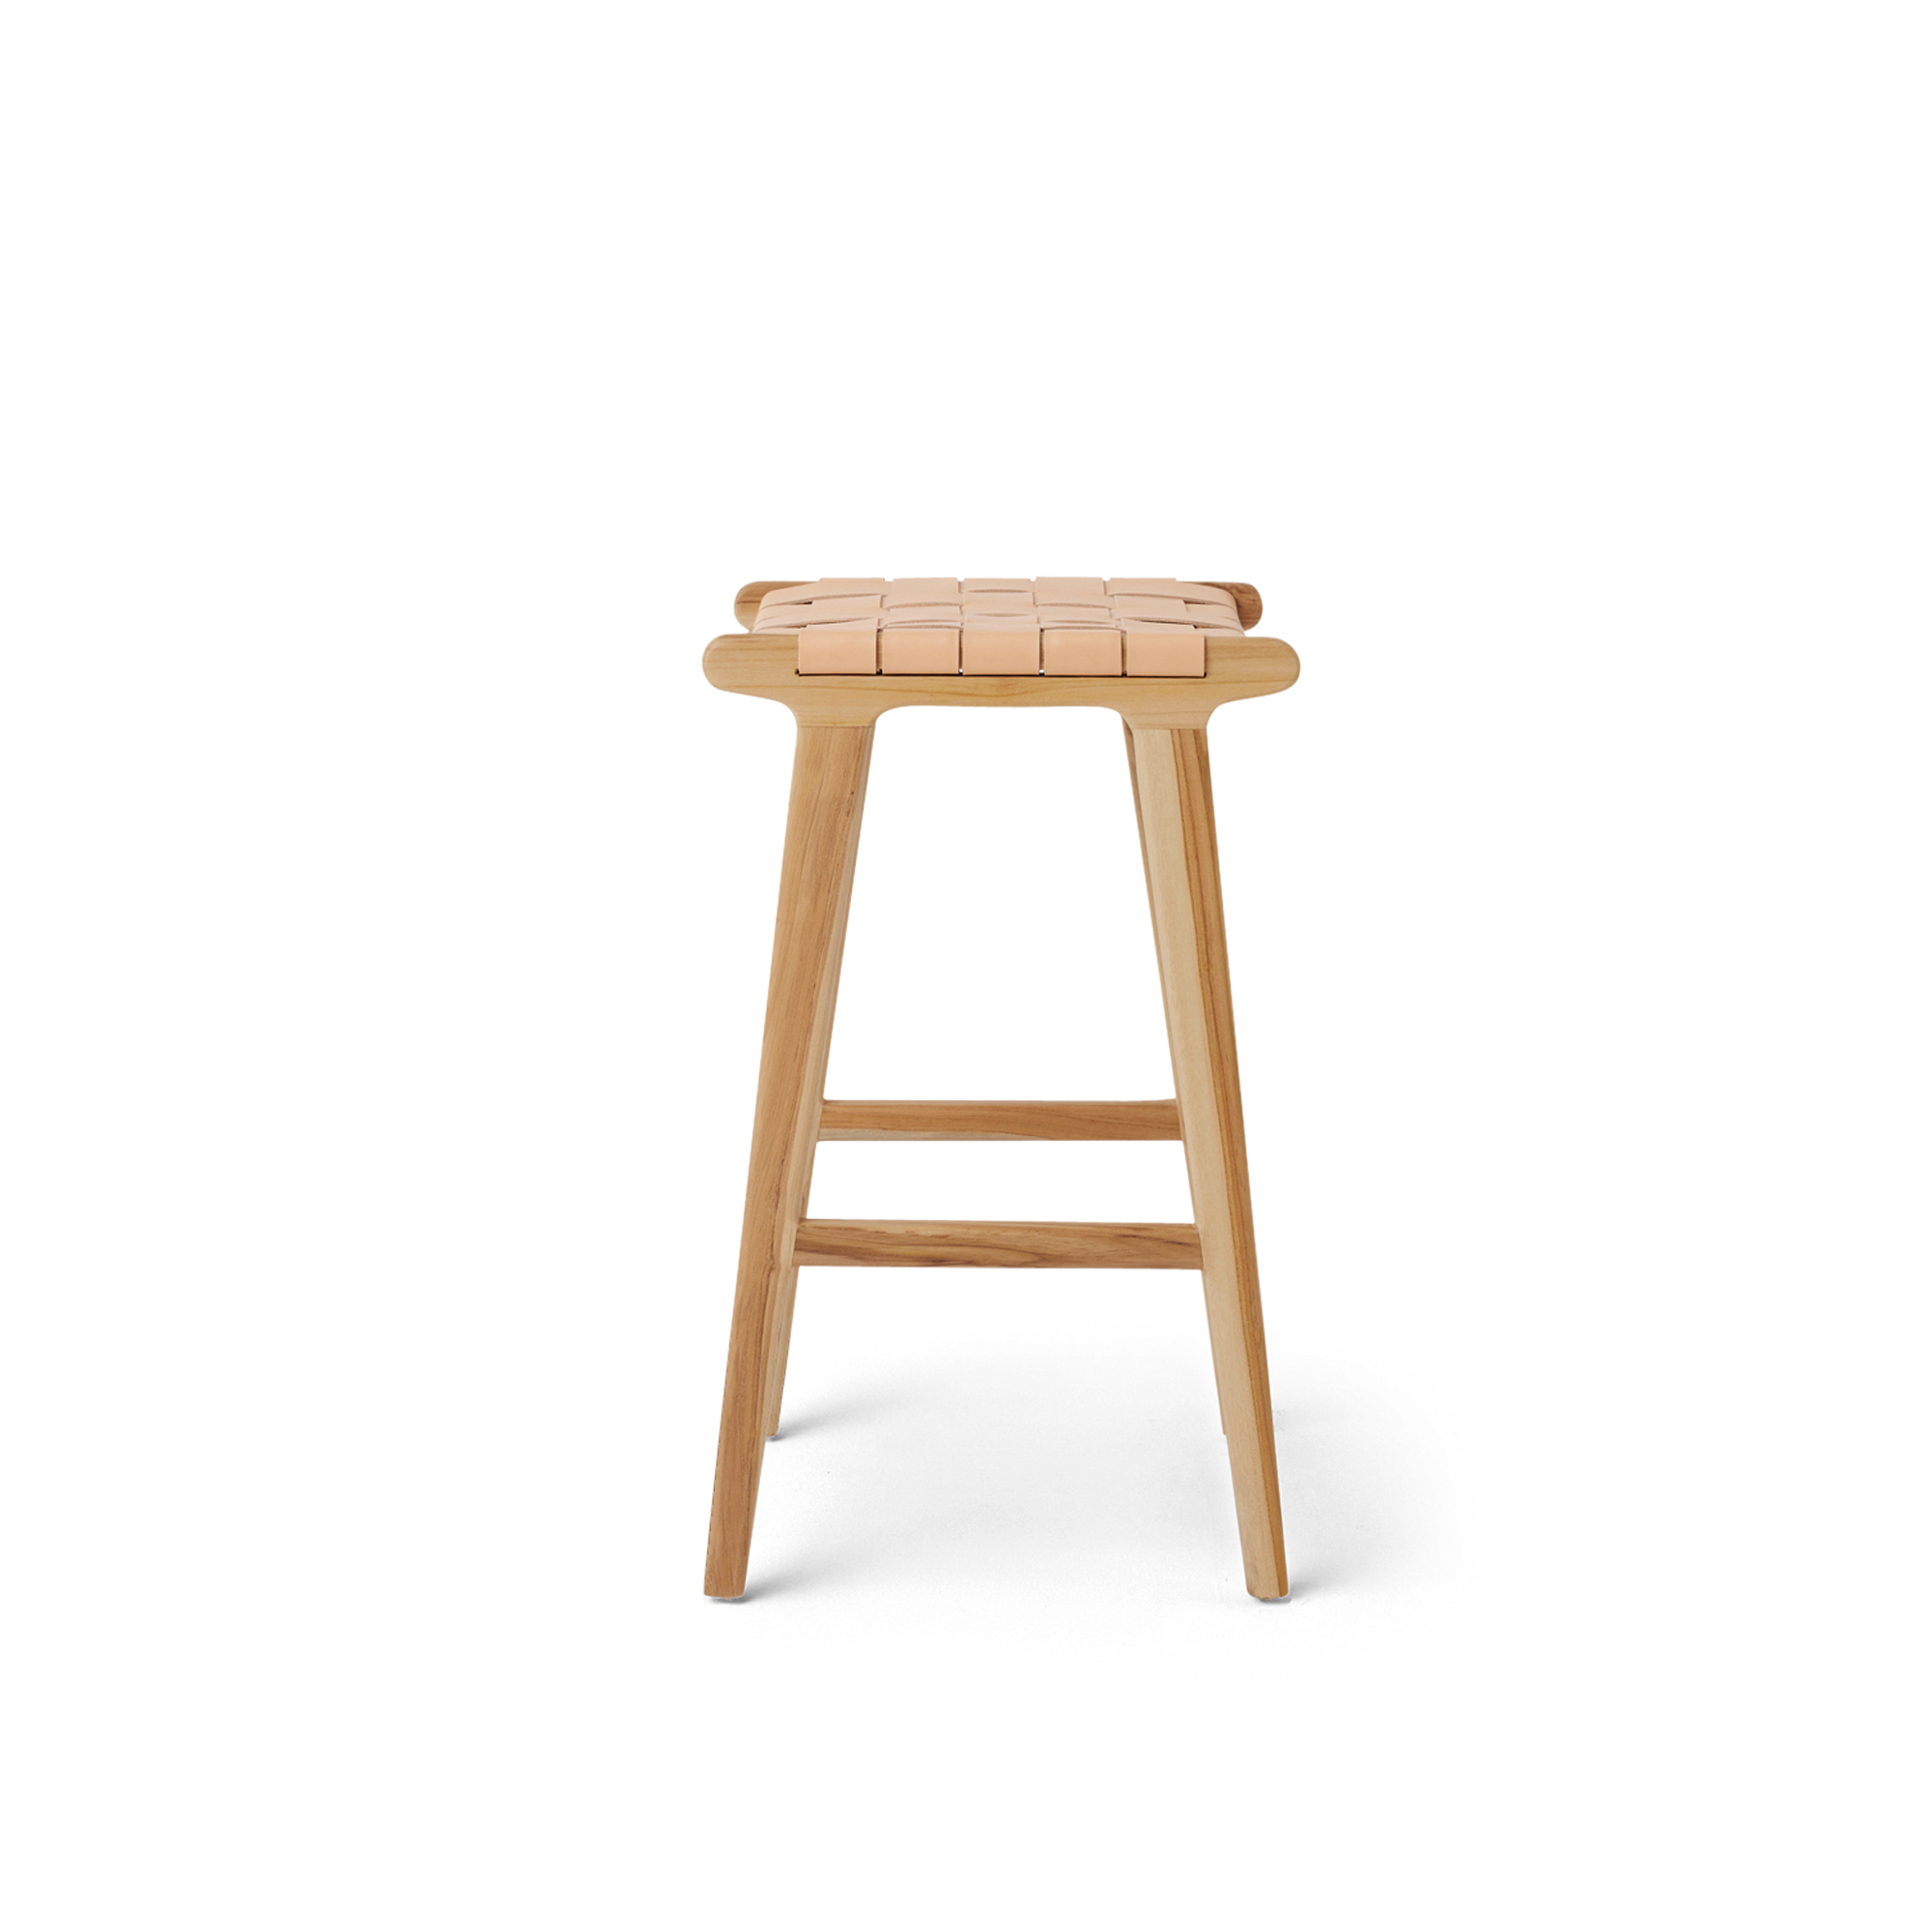 open box - stool #3 in natural